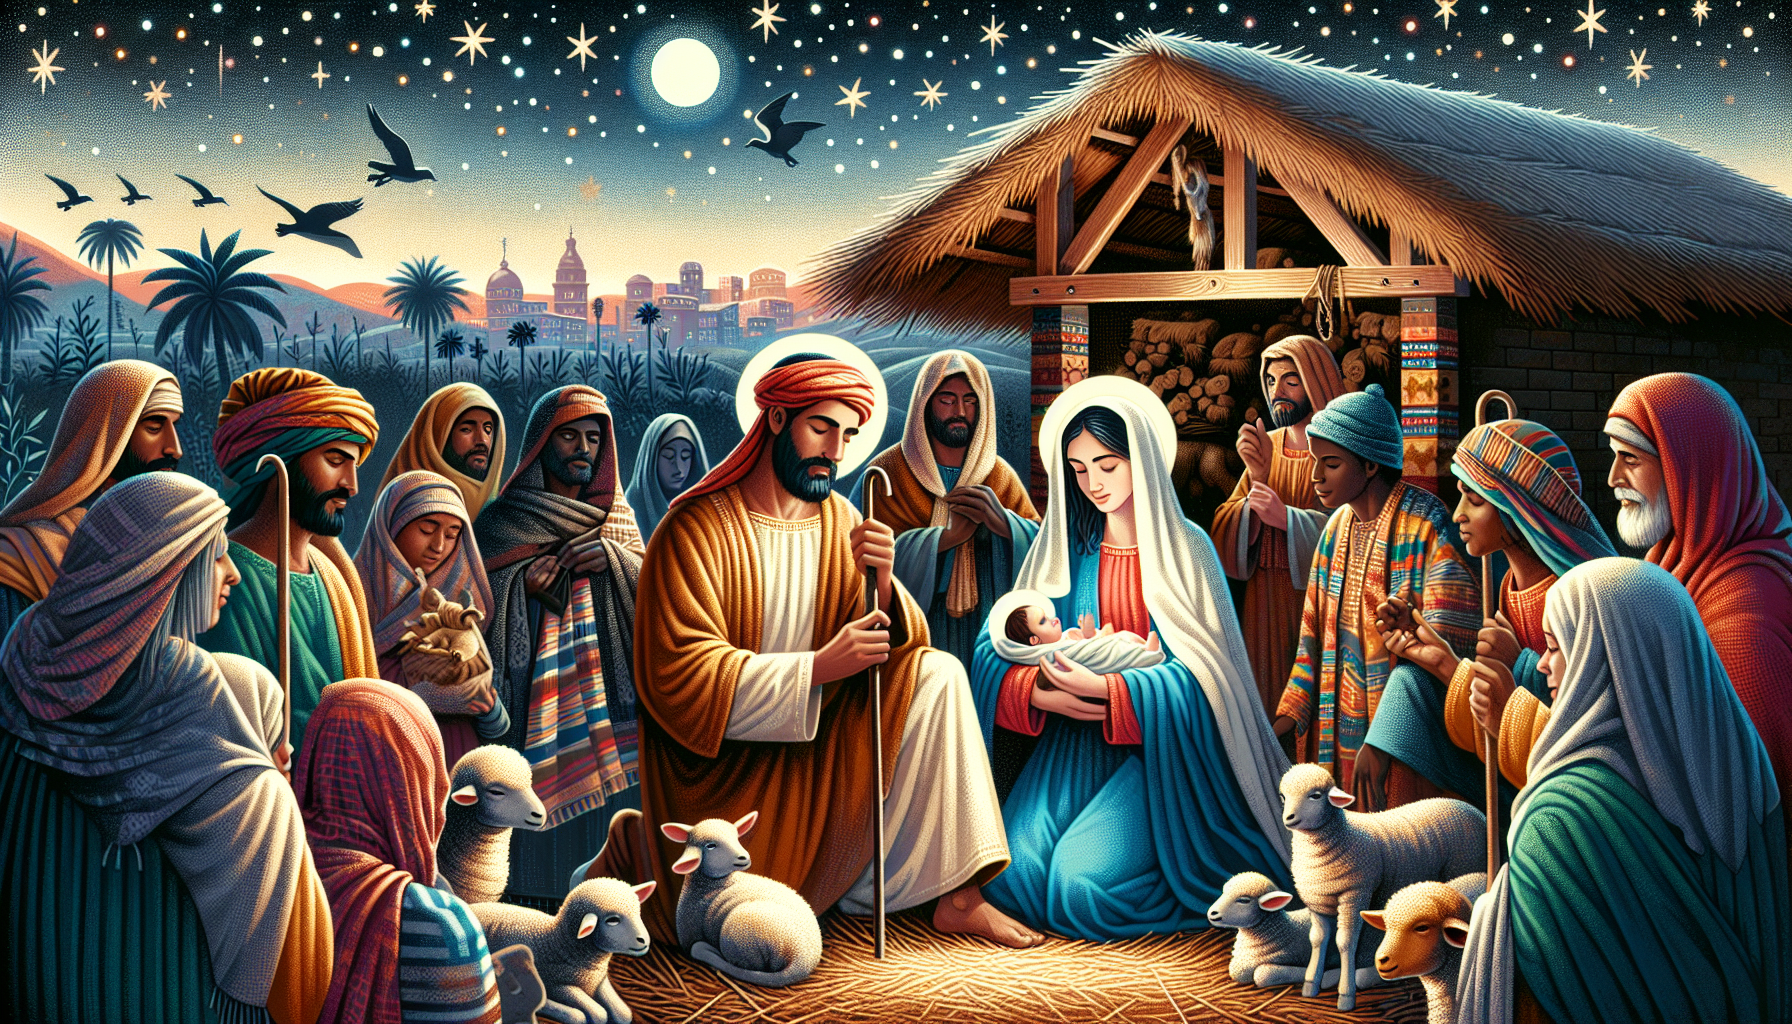 Digital illustration of a serene Nativity scene with Mary, Joseph, and baby Jesus in a rustic stable, surrounded by animals and shepherds under a starry night sky, in the style of a classical Renaissa